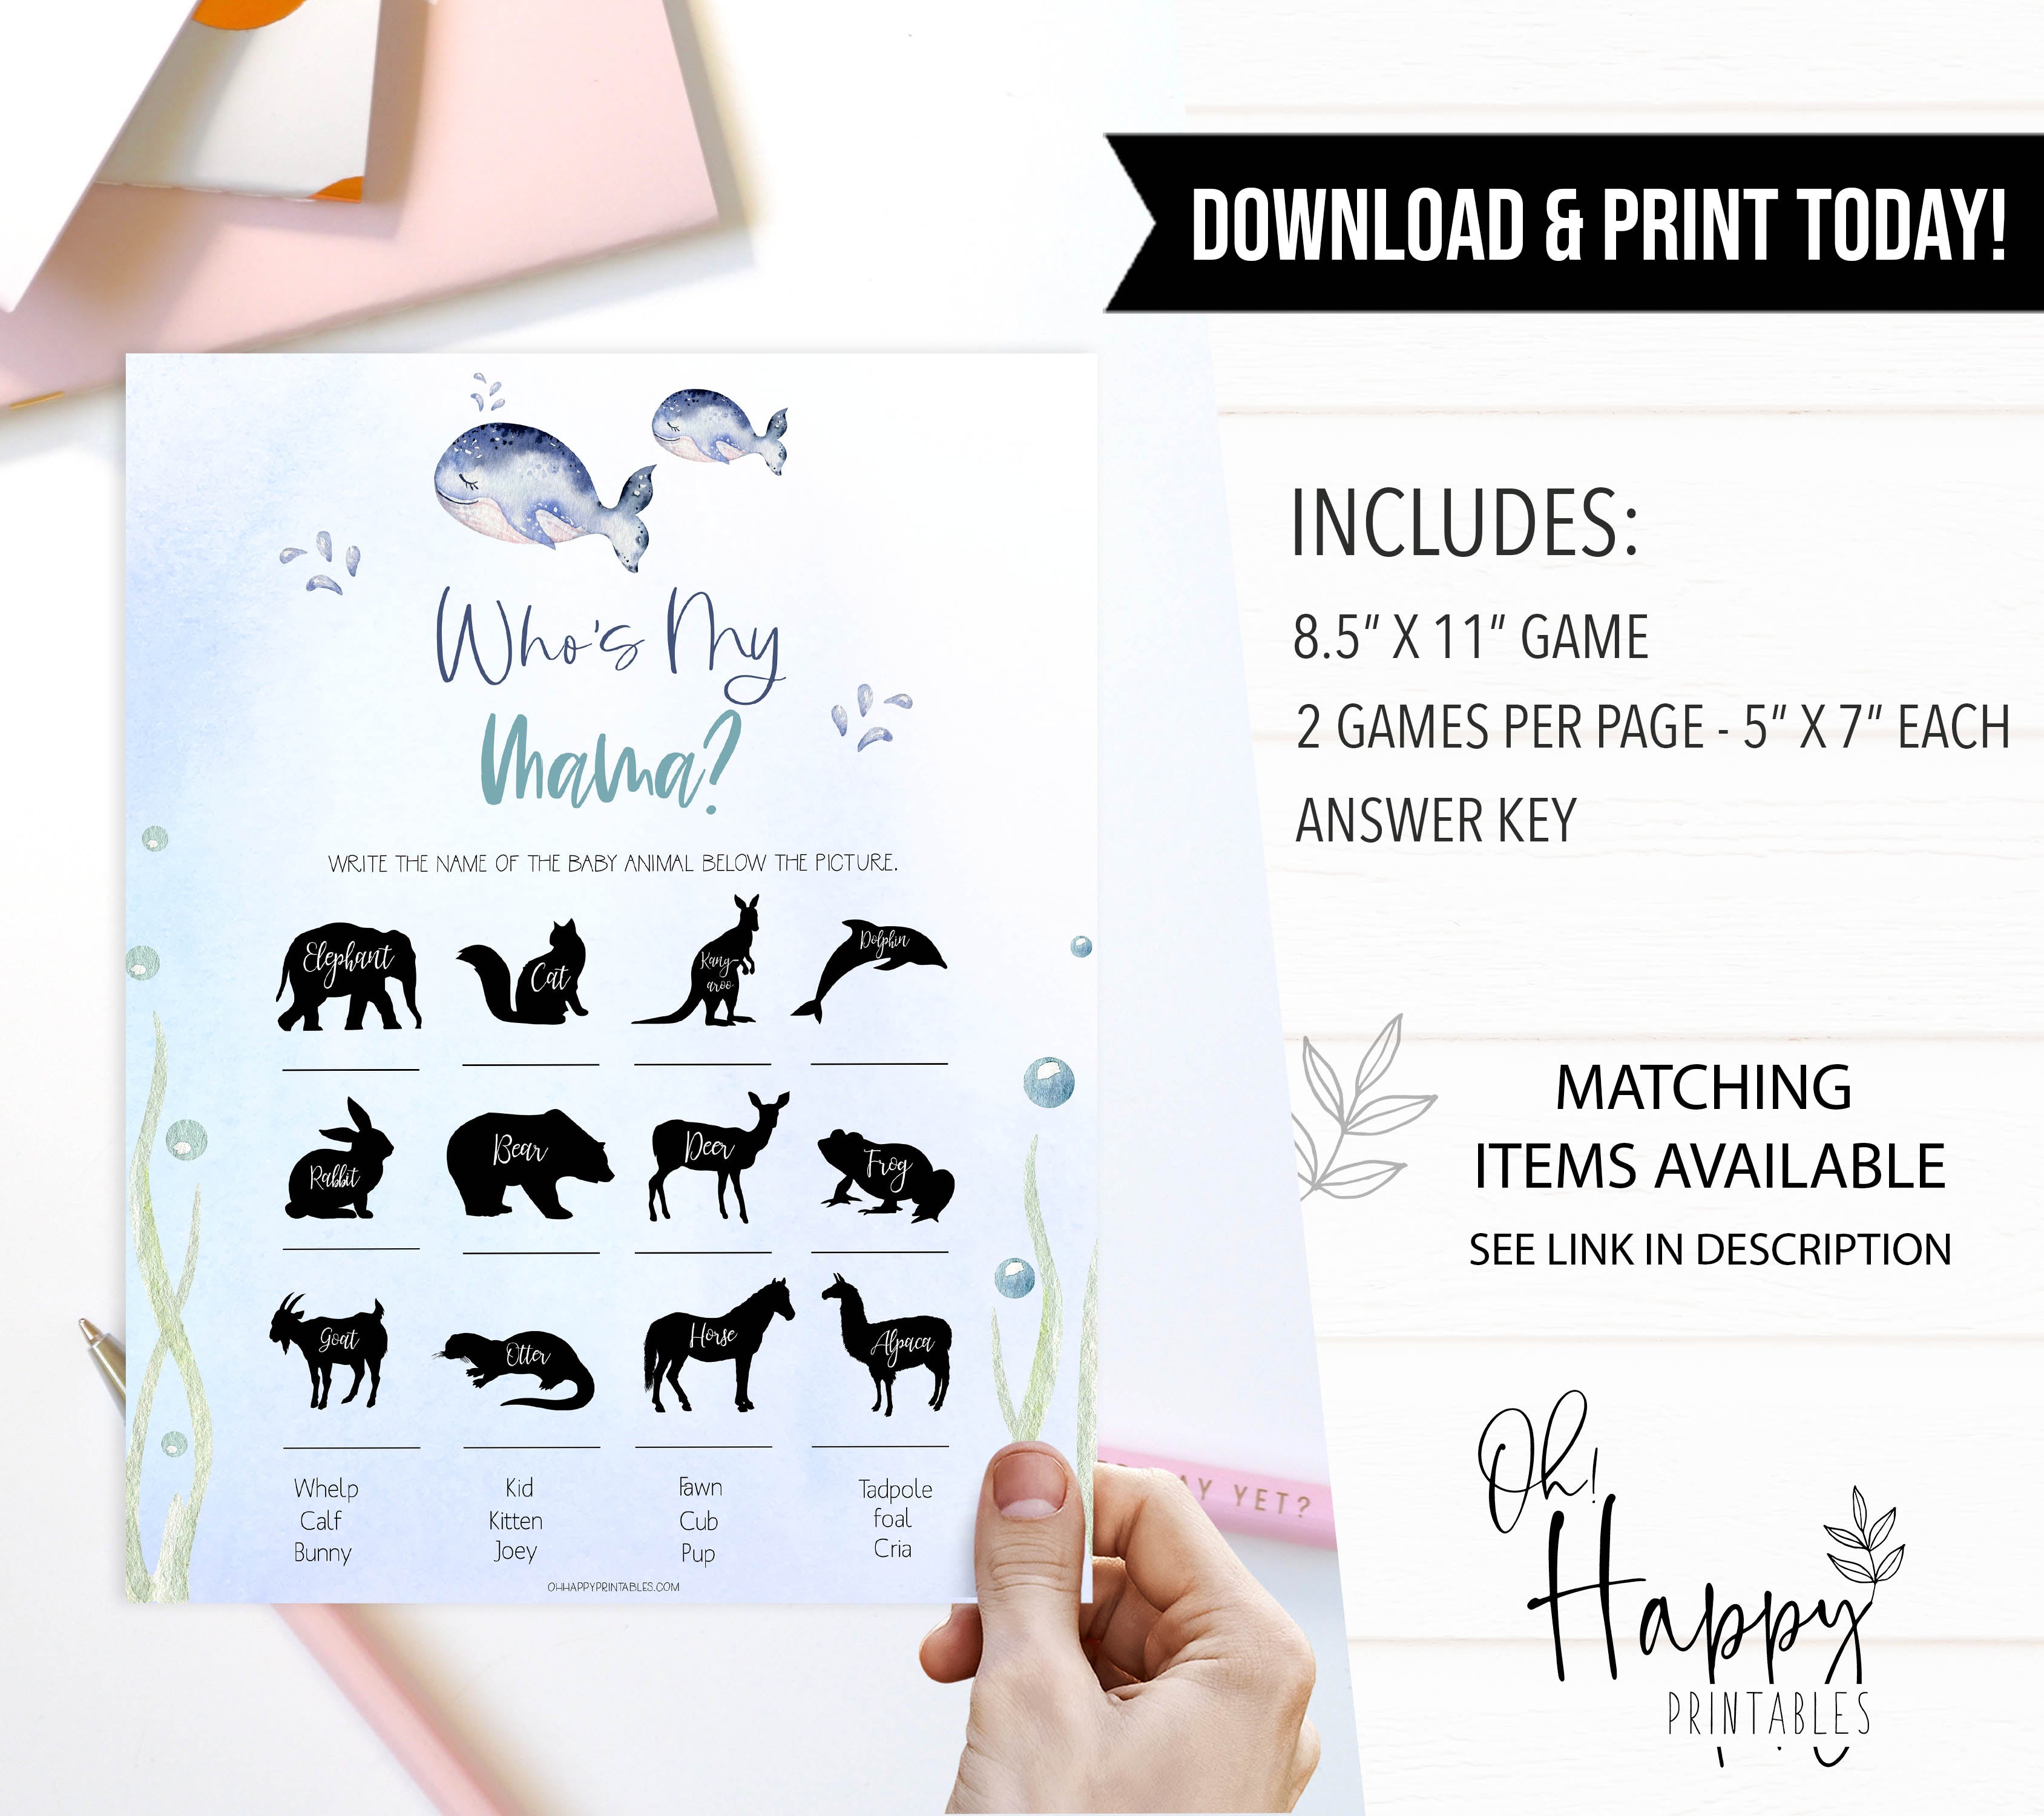 who is my mama baby shower game, Printable baby shower games, whale baby games, baby shower games, fun baby shower ideas, top baby shower ideas, whale baby shower, baby shower games, fun whale baby shower ideas